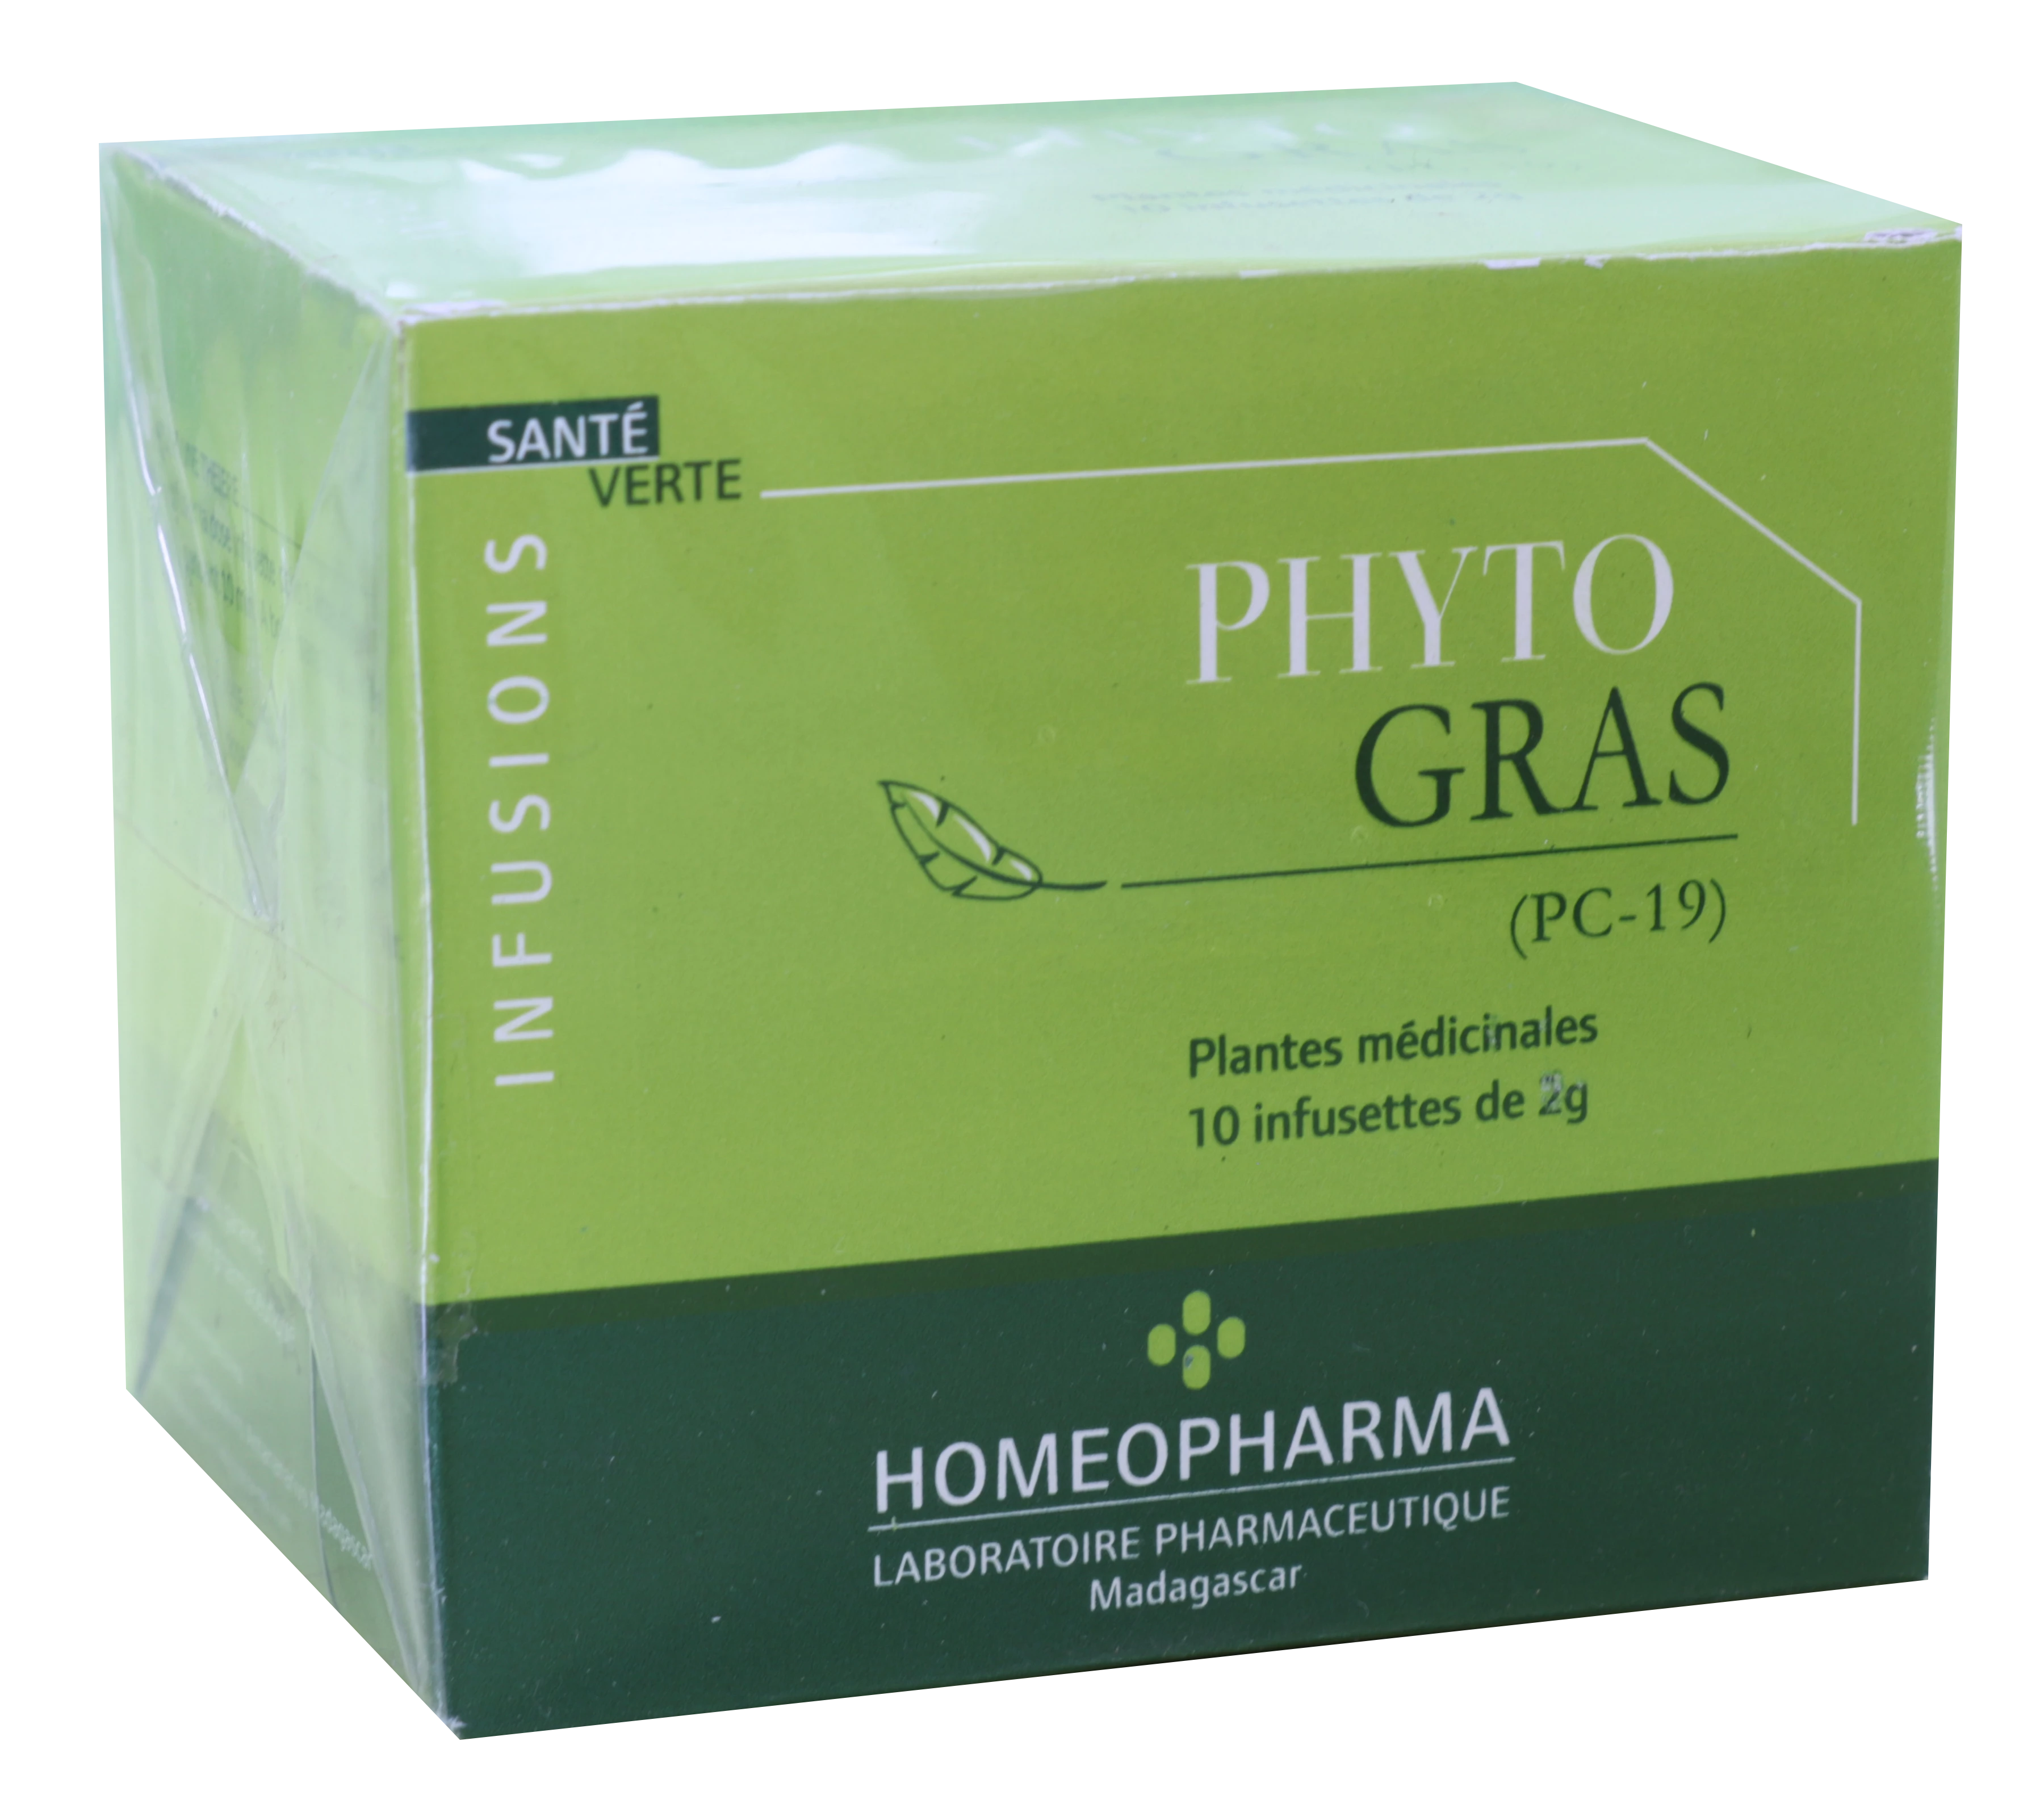 Traditionelle Phytotherapie Pc19-phyto-gras Box 20 Infusetten - HOMEOPHARMA